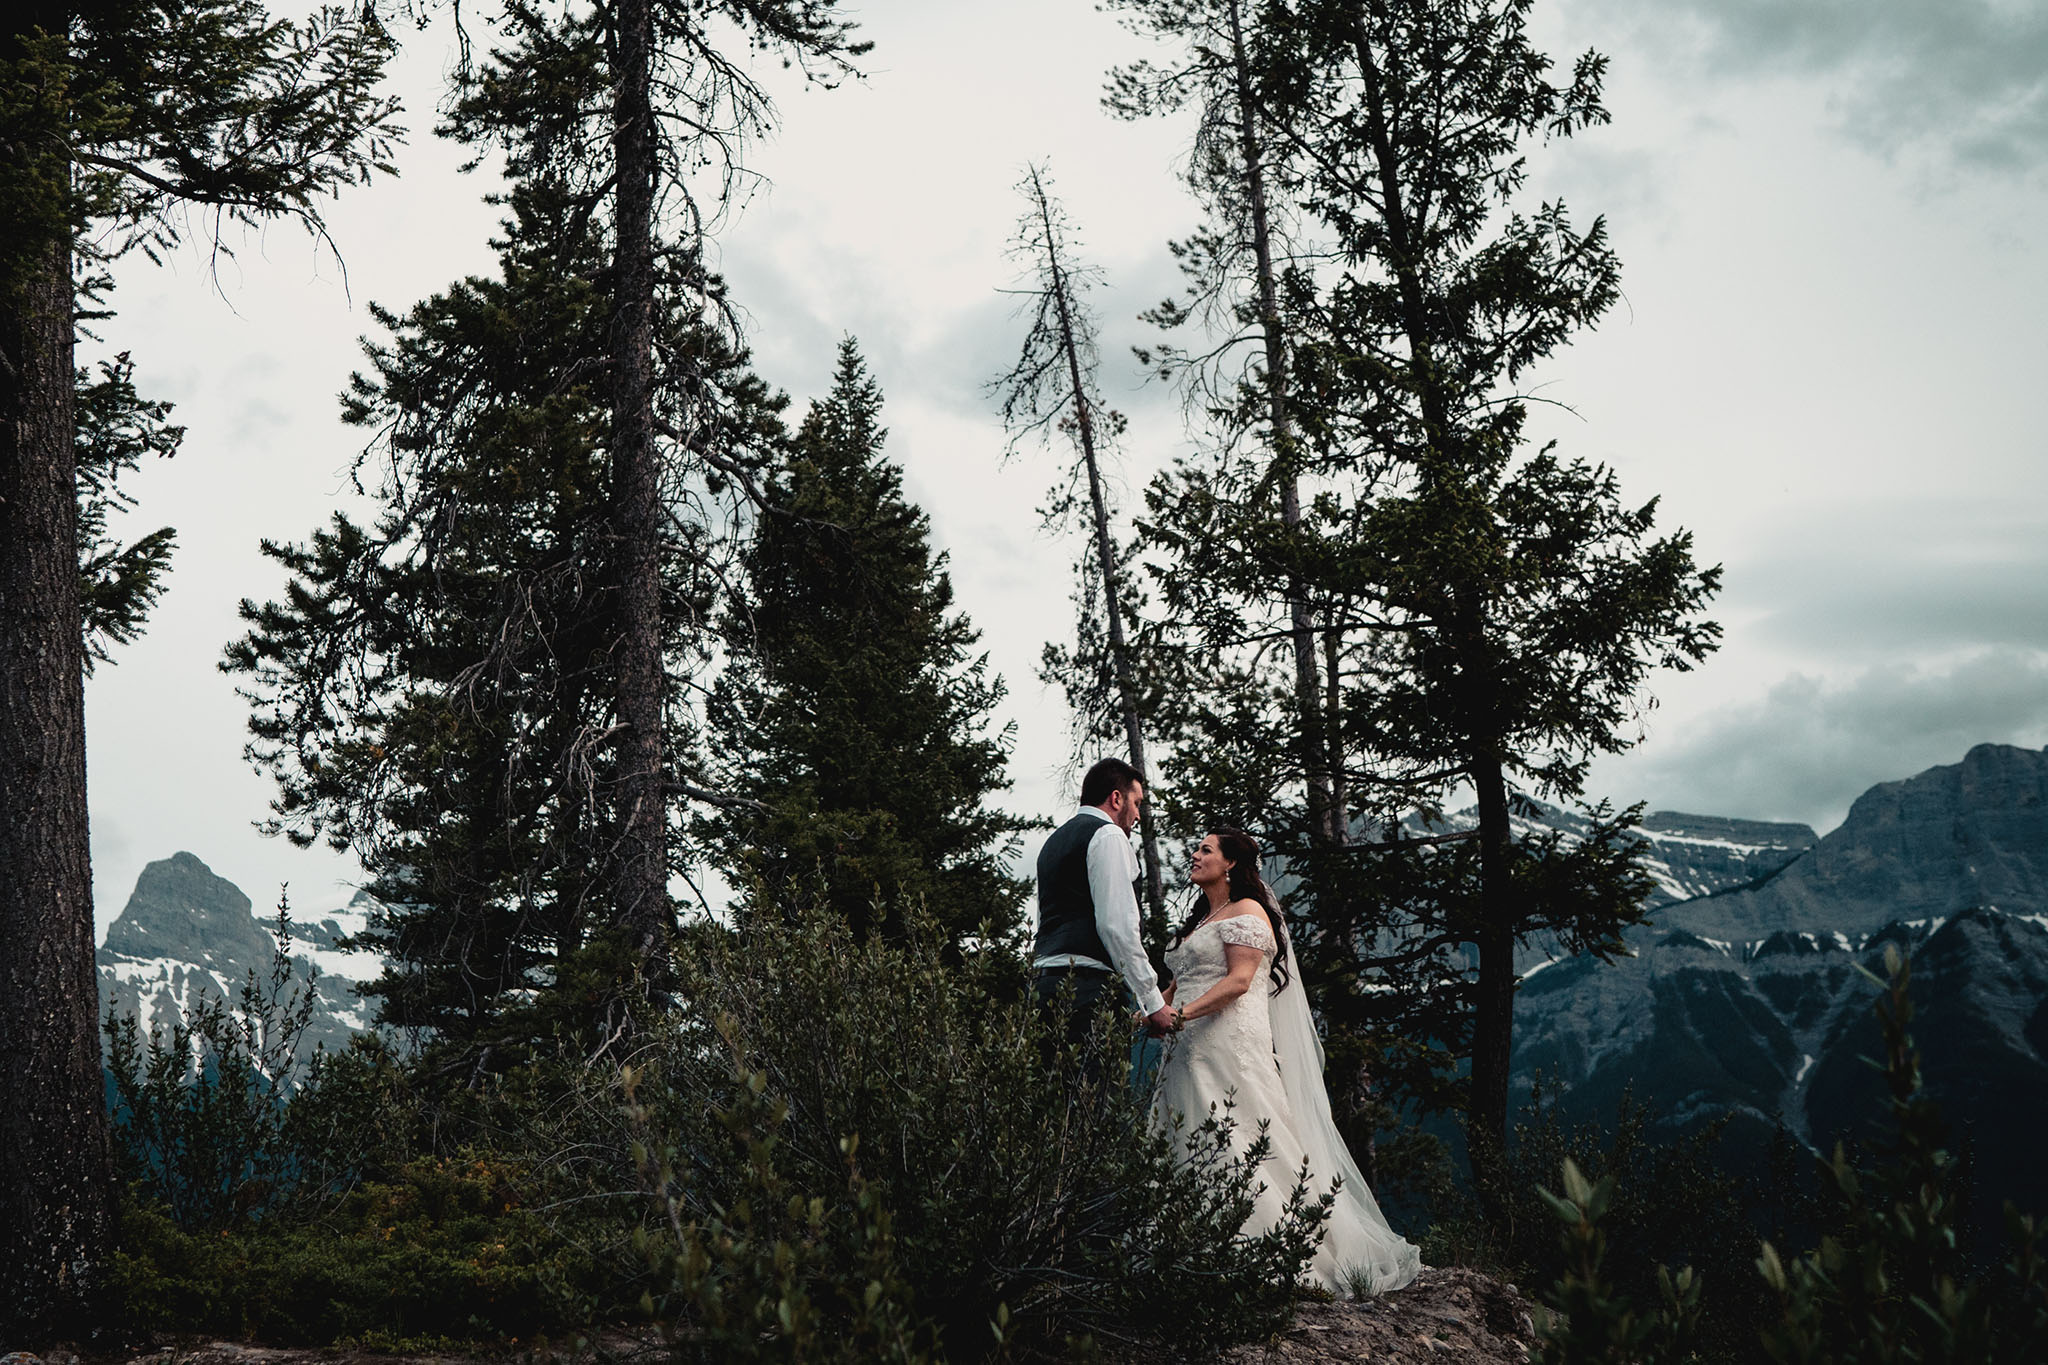 Gorgeous couple with the Rocky Mountains behind them as a backdrop.